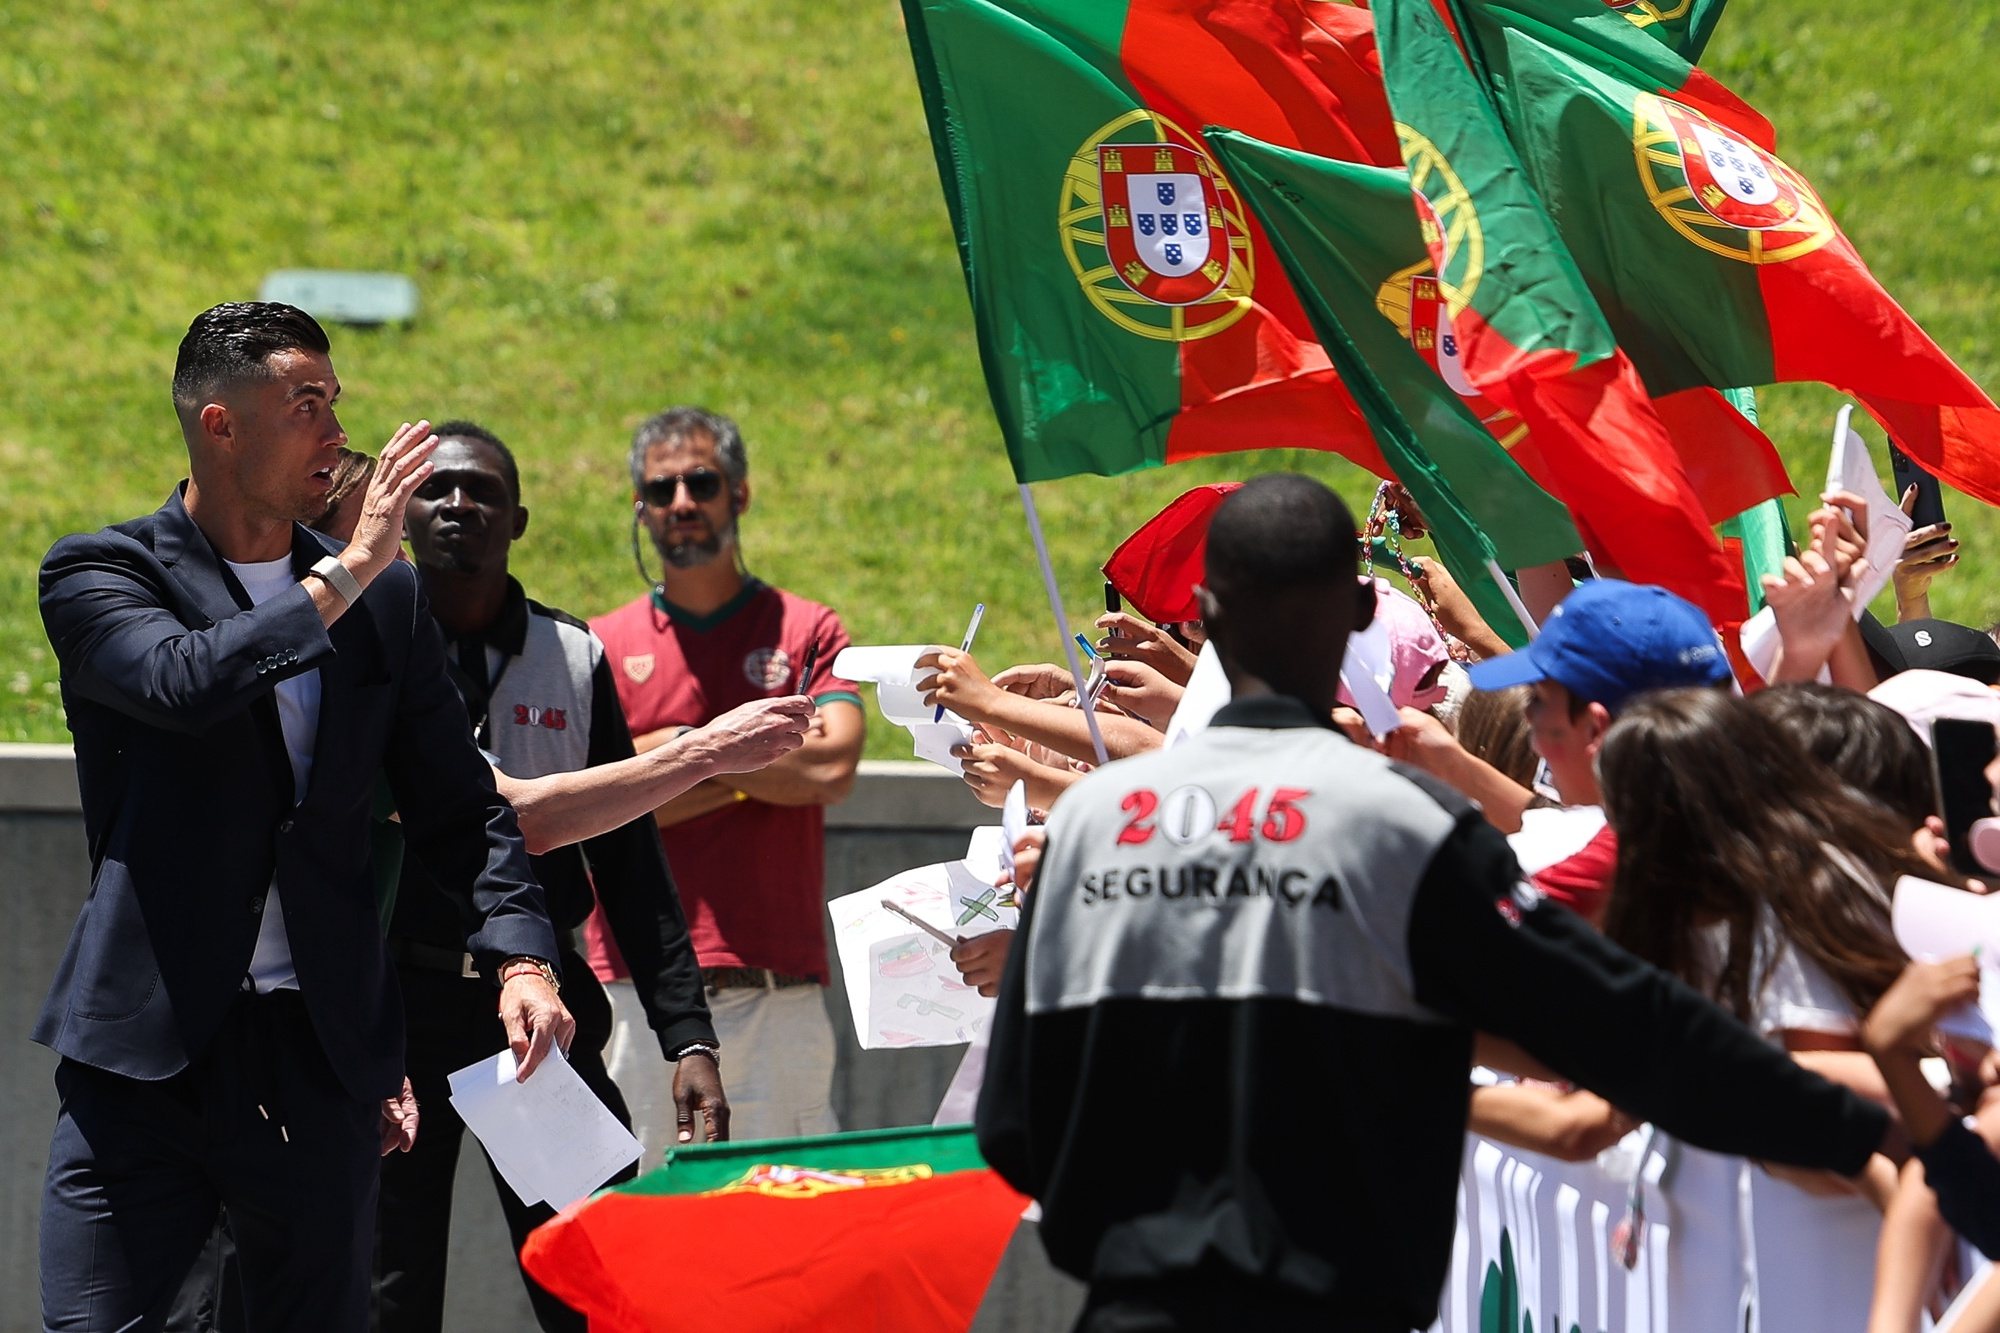 Portuguese national soccer team player Cristiano Ronaldo waves to the crowd in Oeiras, 13th june 2024. Portuguese team is departing today to participate in Germany on the Euro 2024 Championship. TIAGO PETINGA/LUSA